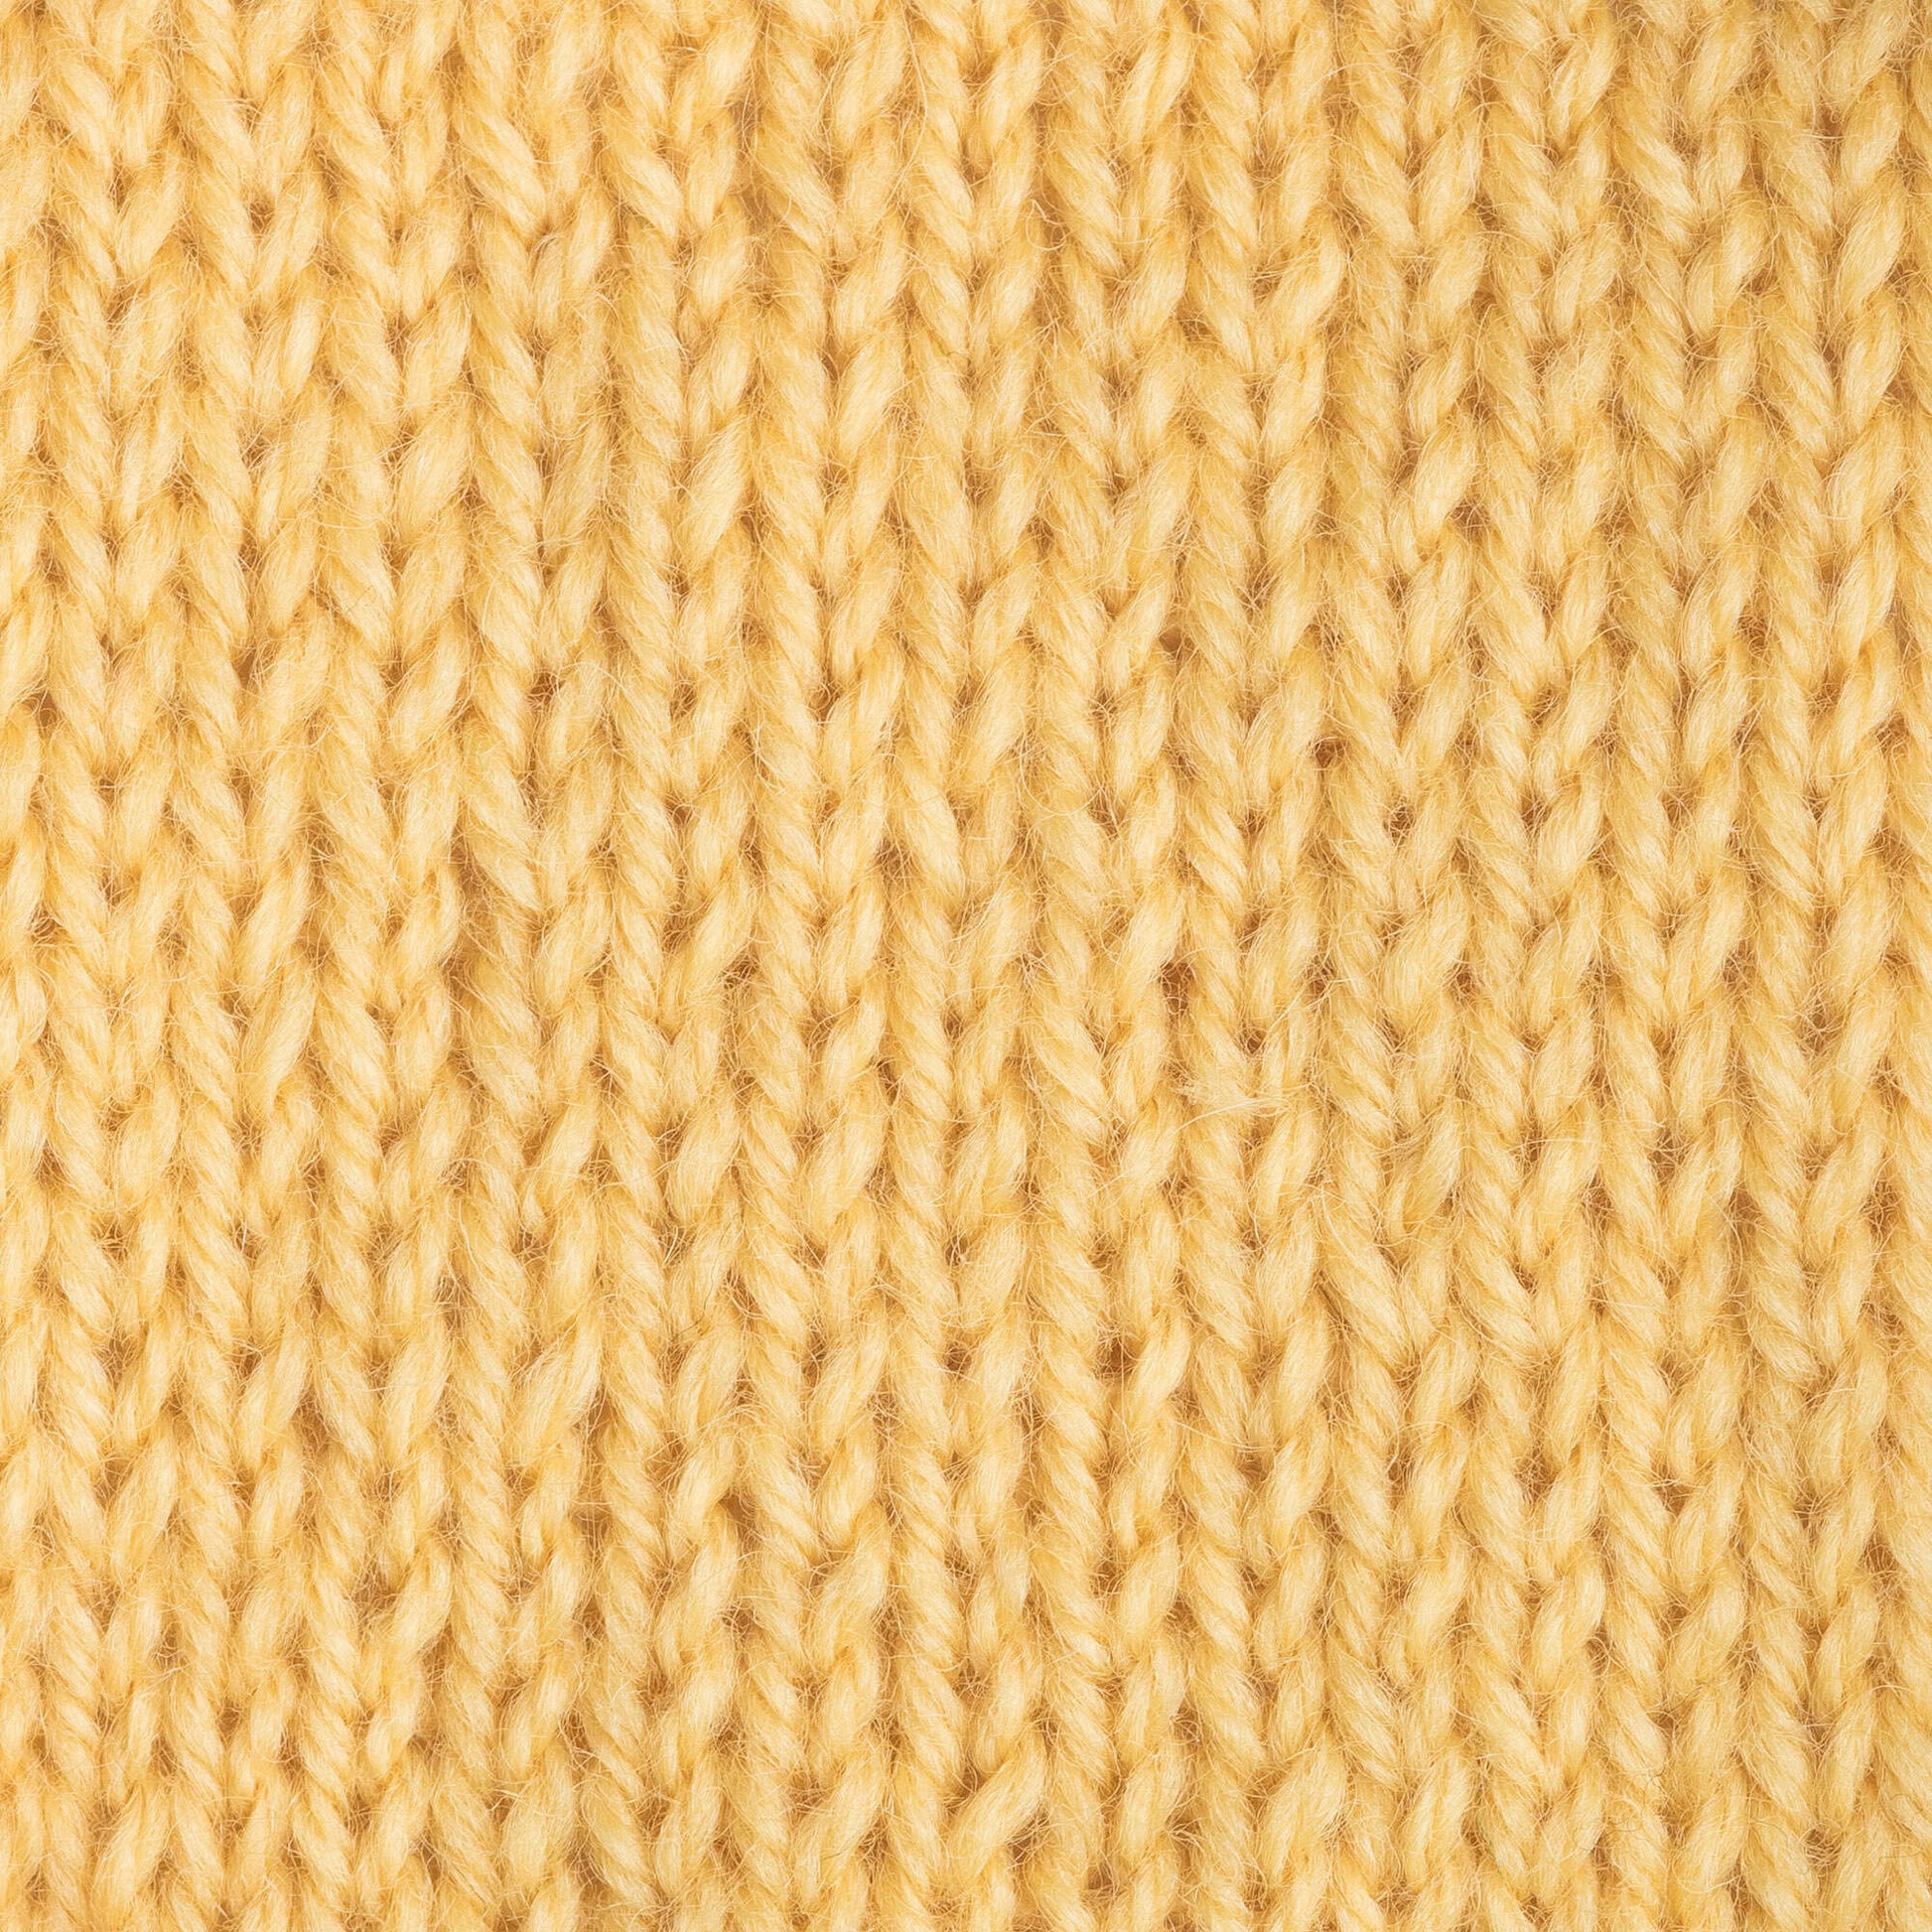 Patons Classic Wool Worsted Yarn - Discontinued Shades Sunset Gold